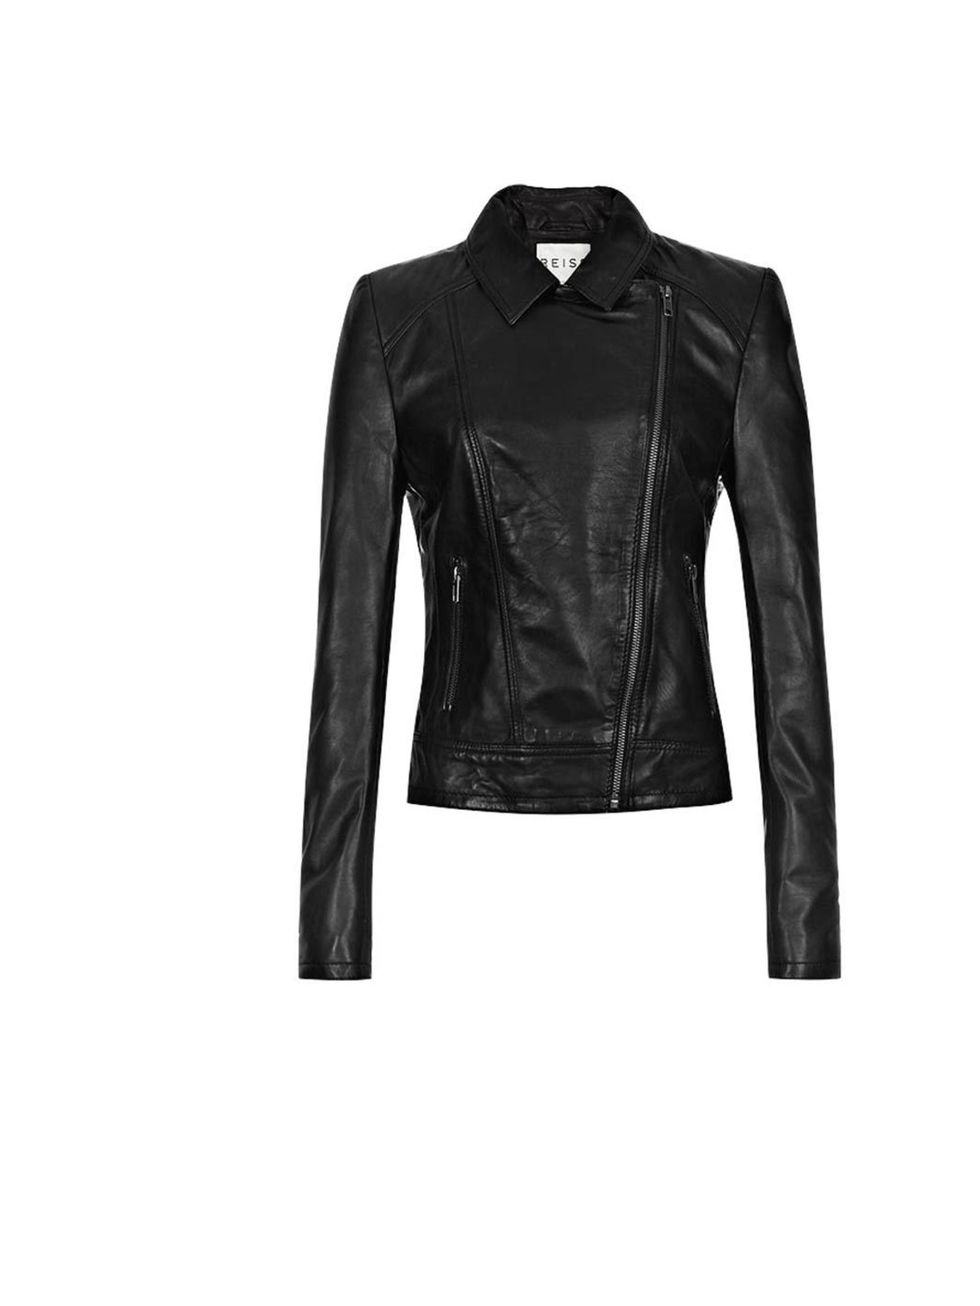 <p><a href="http://www.reissonline.com/shop/womens/coats_and_jackets/leather/marli/black/">Reiss</a> 'Marli' leather jacket, £395</p>